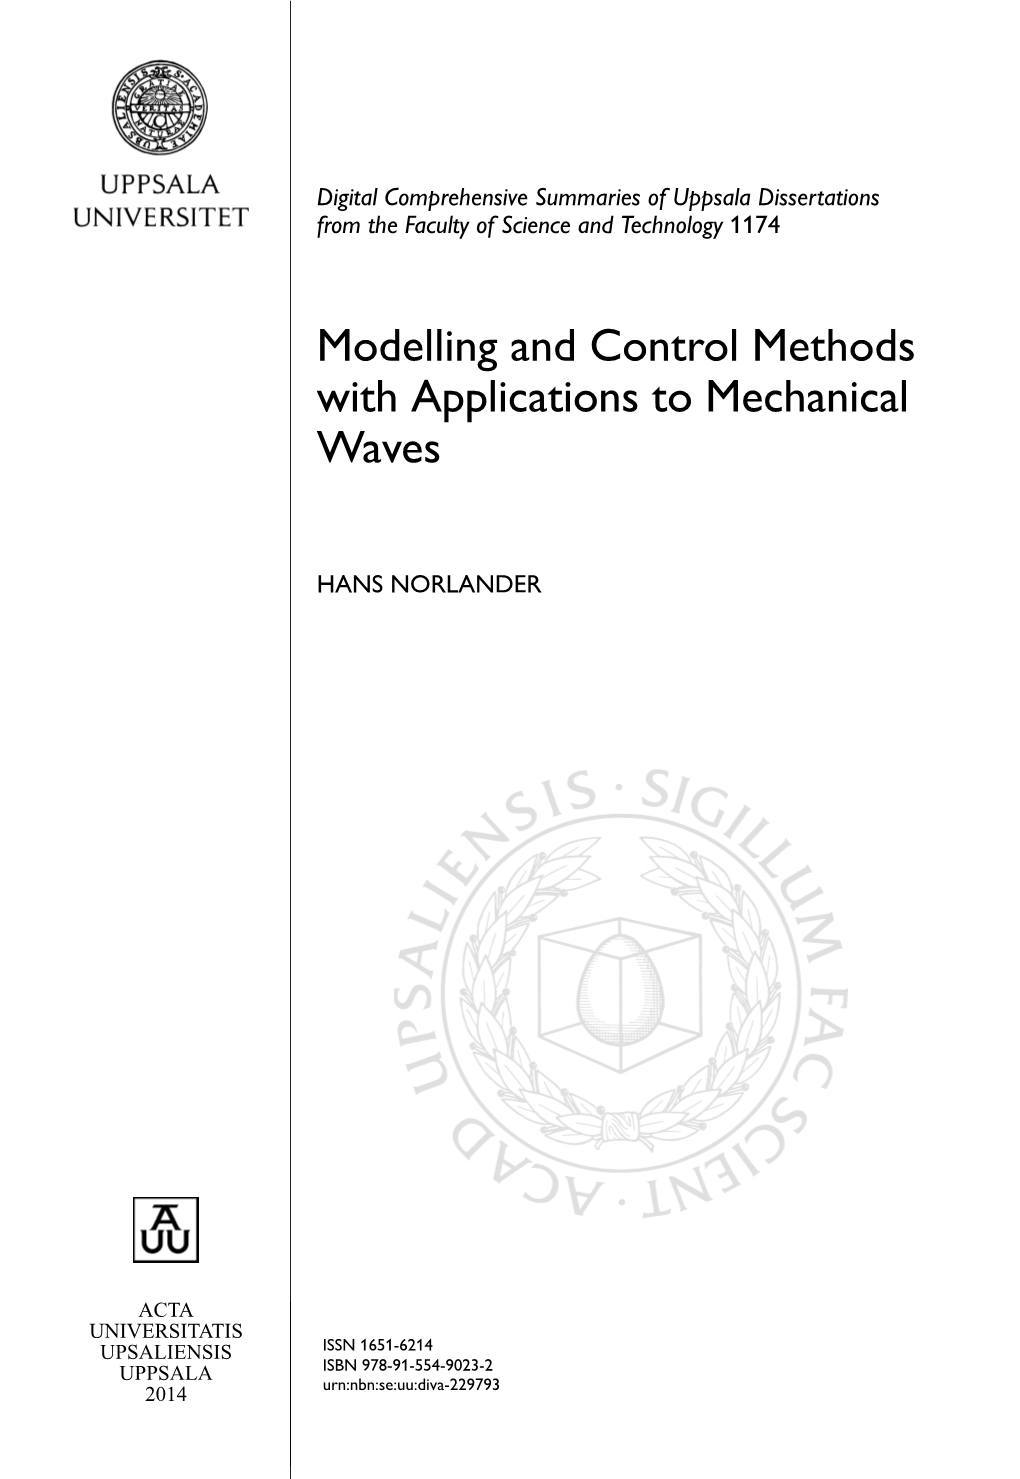 Modelling and Control Methods with Applications to Mechanical Waves